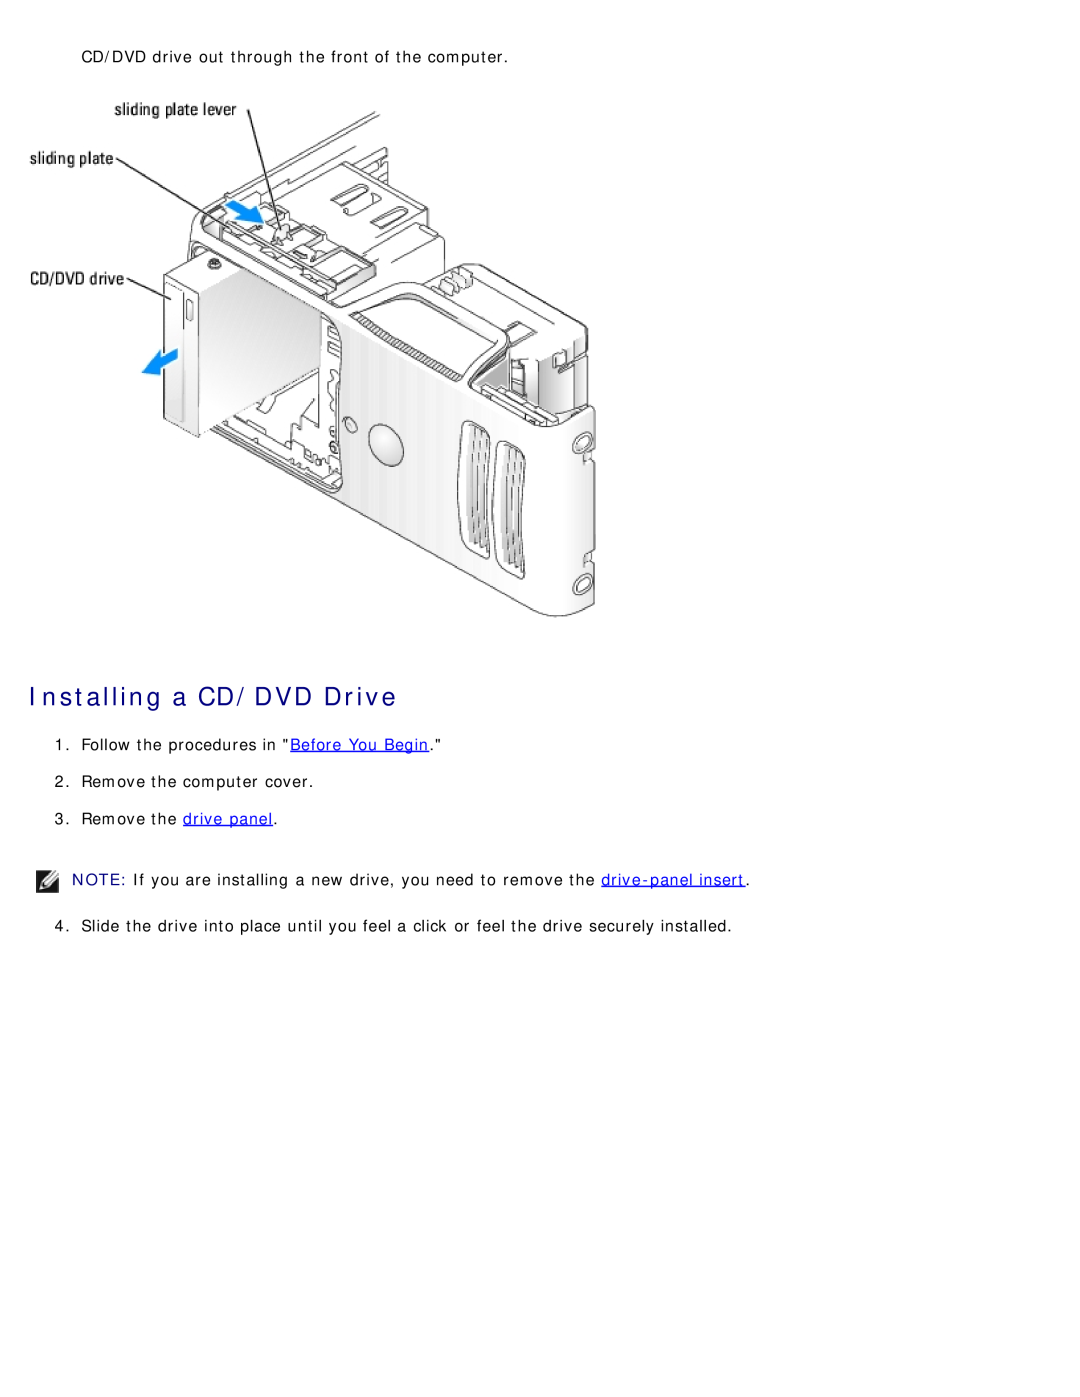 Dell DCSM manual Installing a CD/DVD Drive, CD/DVD drive out through the front of the computer 